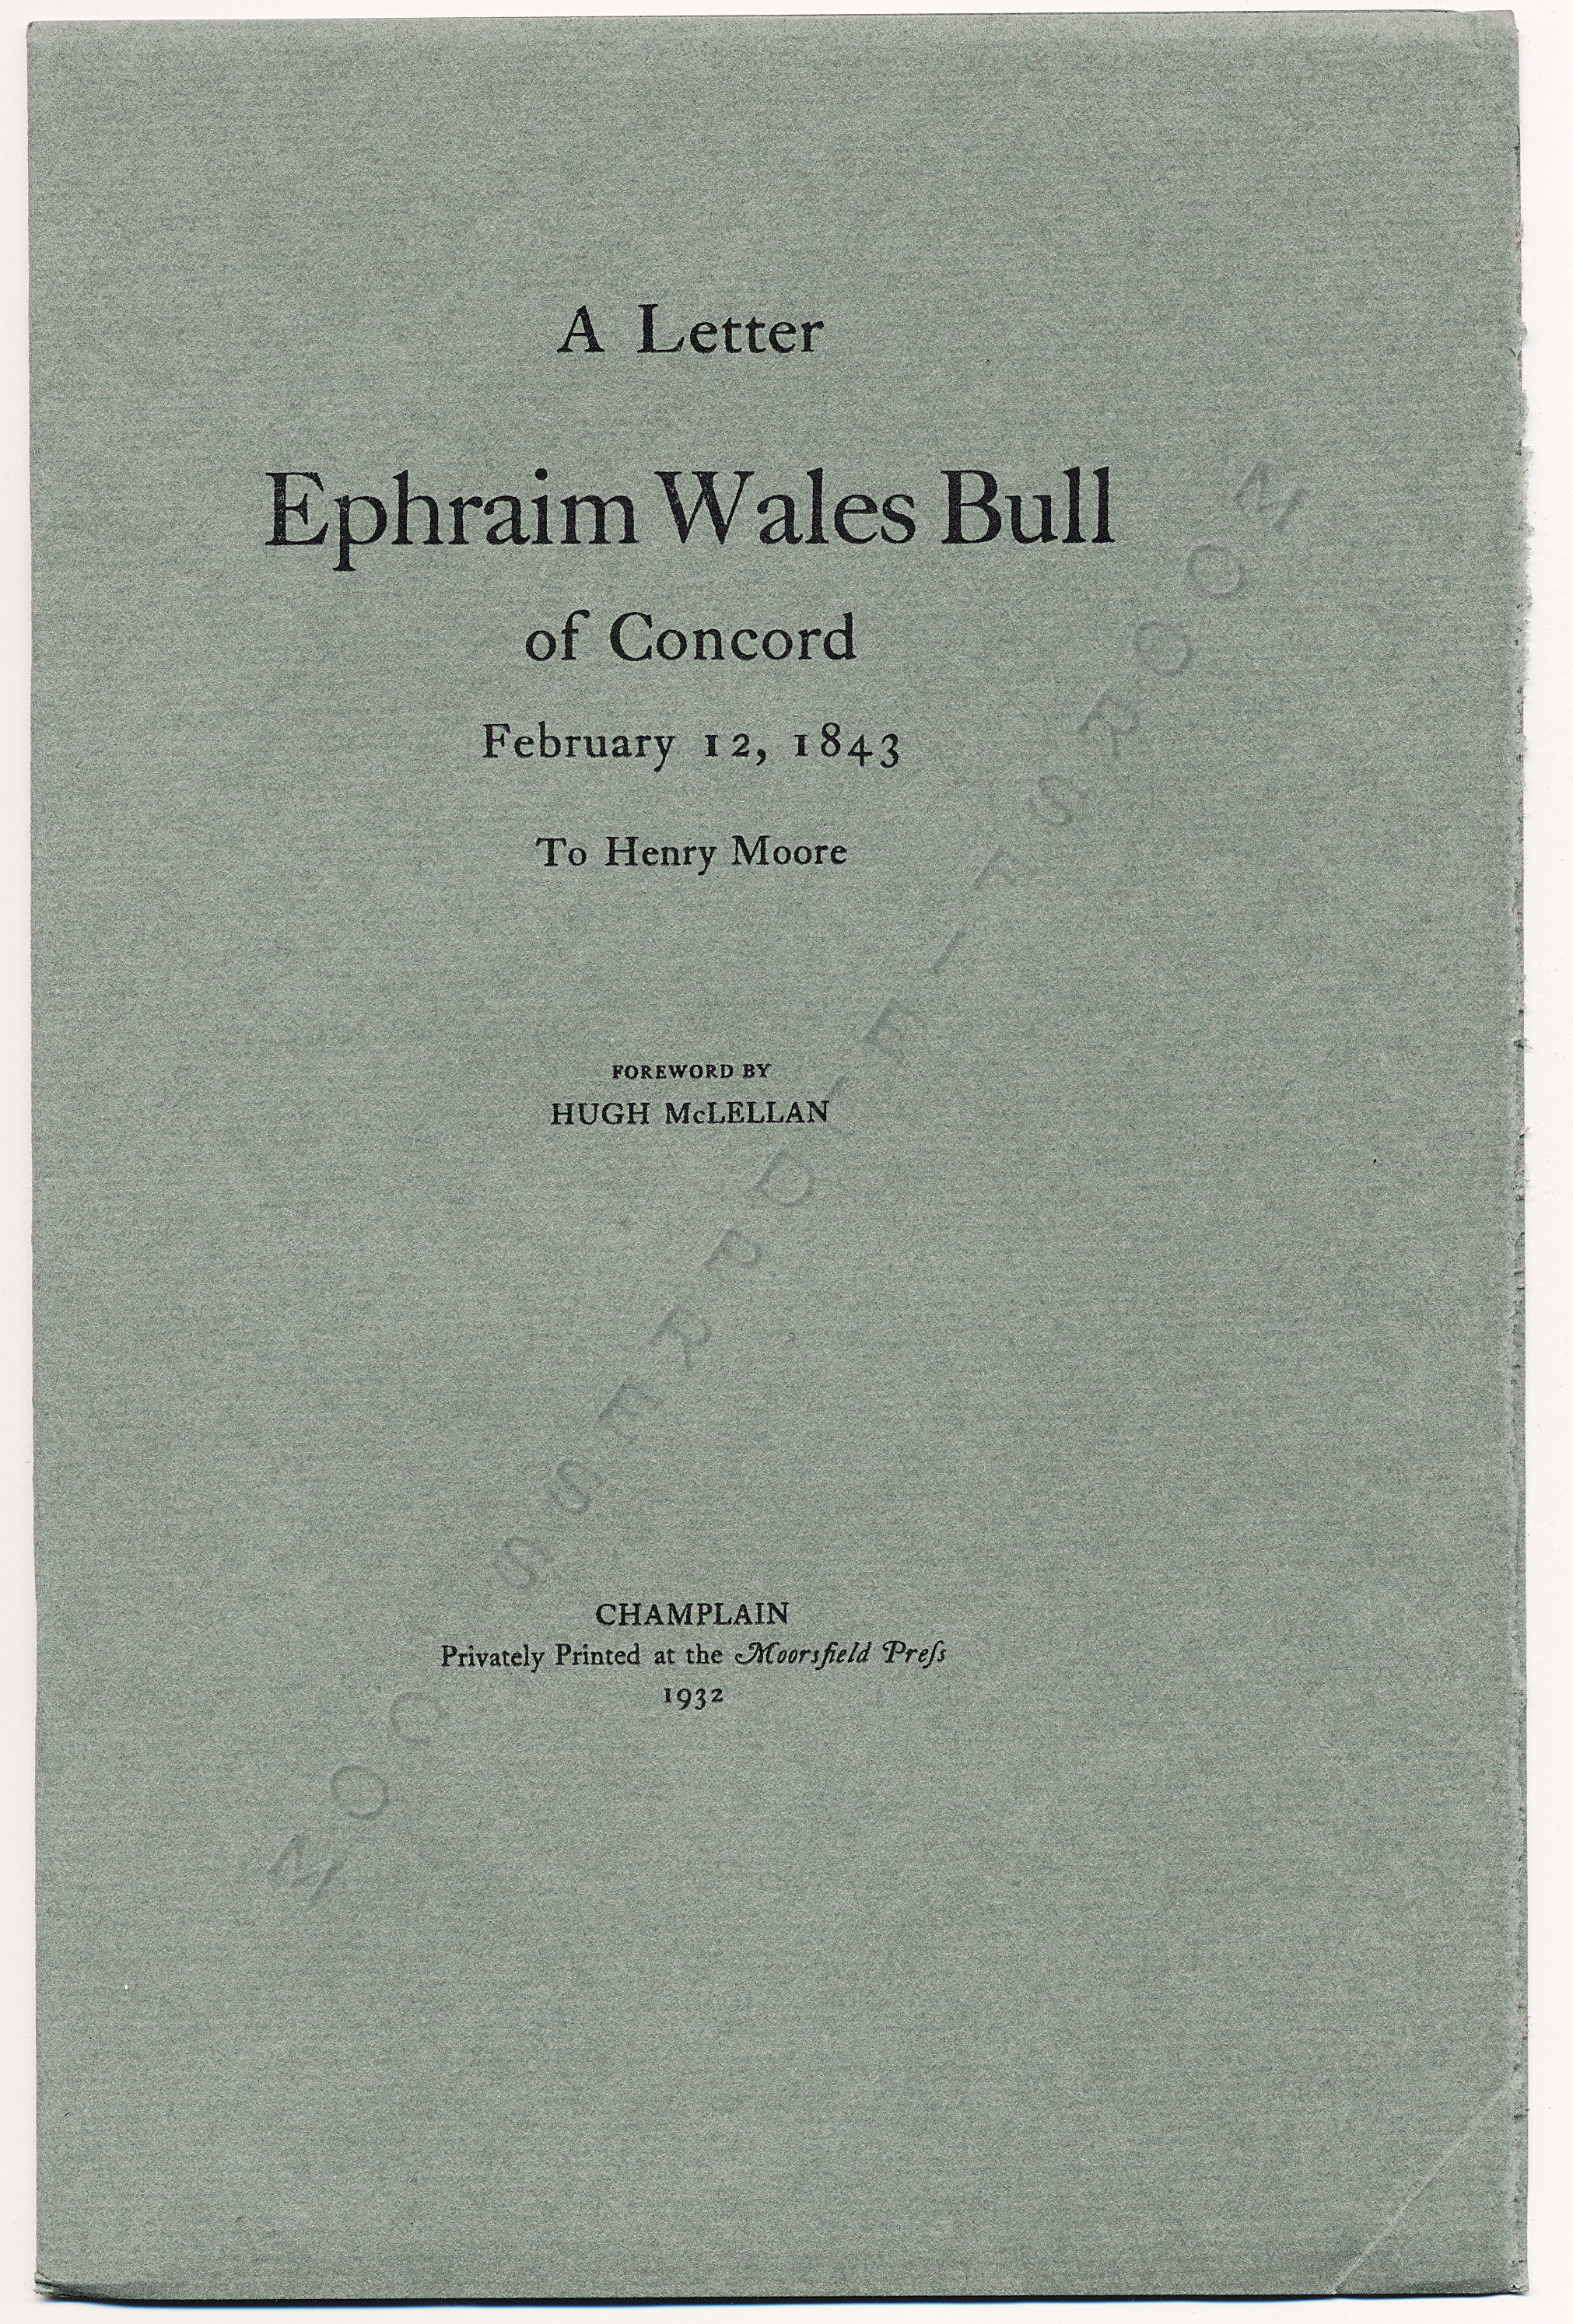 a_letter_ephraim_wales_bull_of_concord